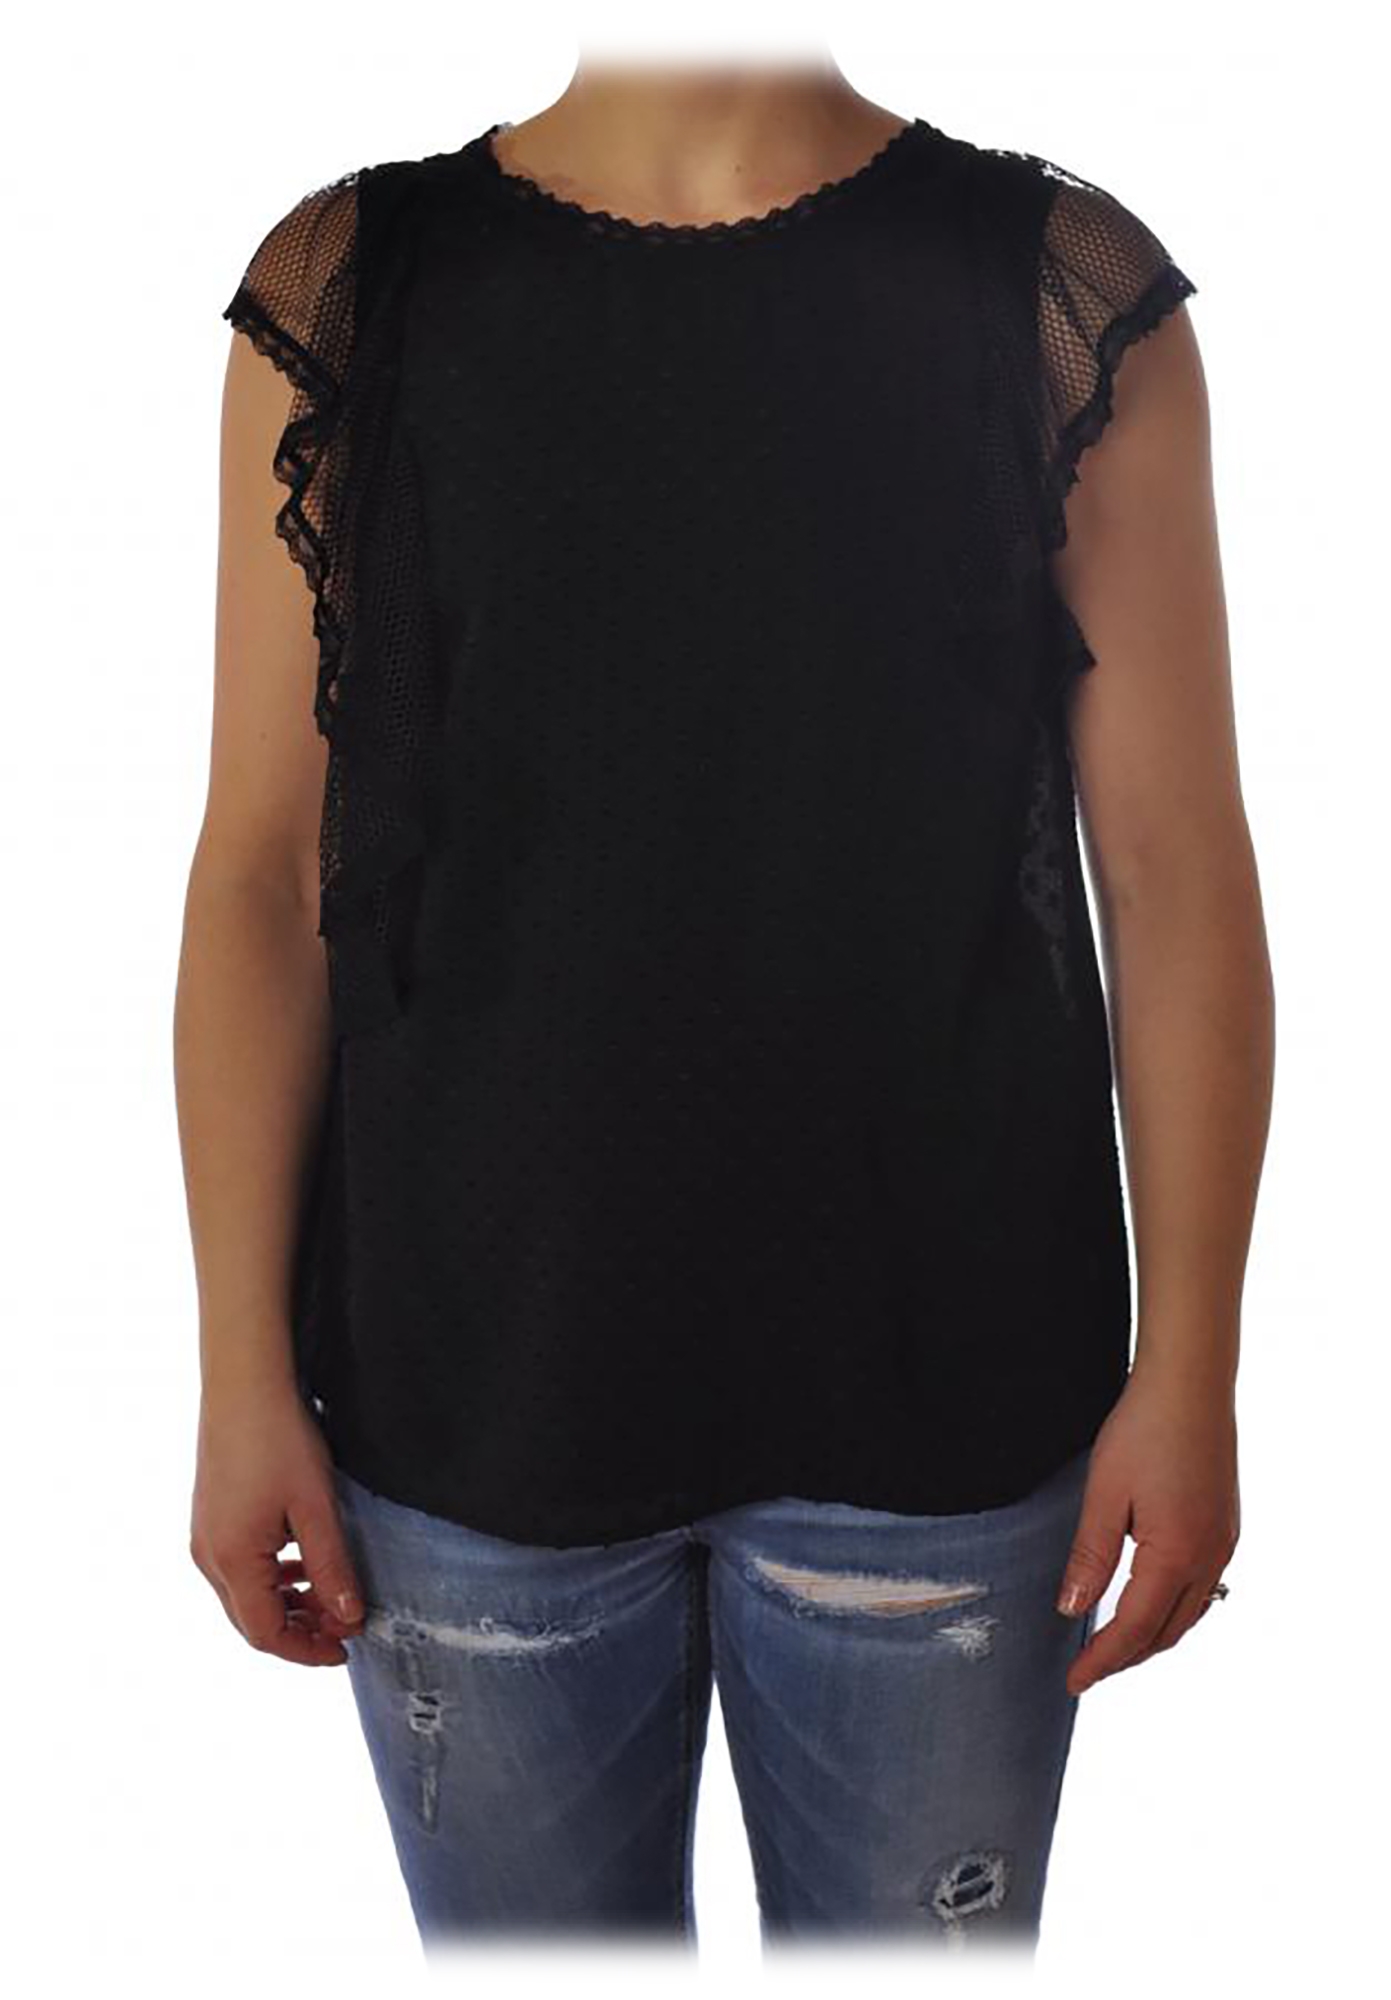 Liu Jo - Top with Lace and Ruffle Details - Black - Made in Italy - Luxury  Exclusive Collection - Avvenice